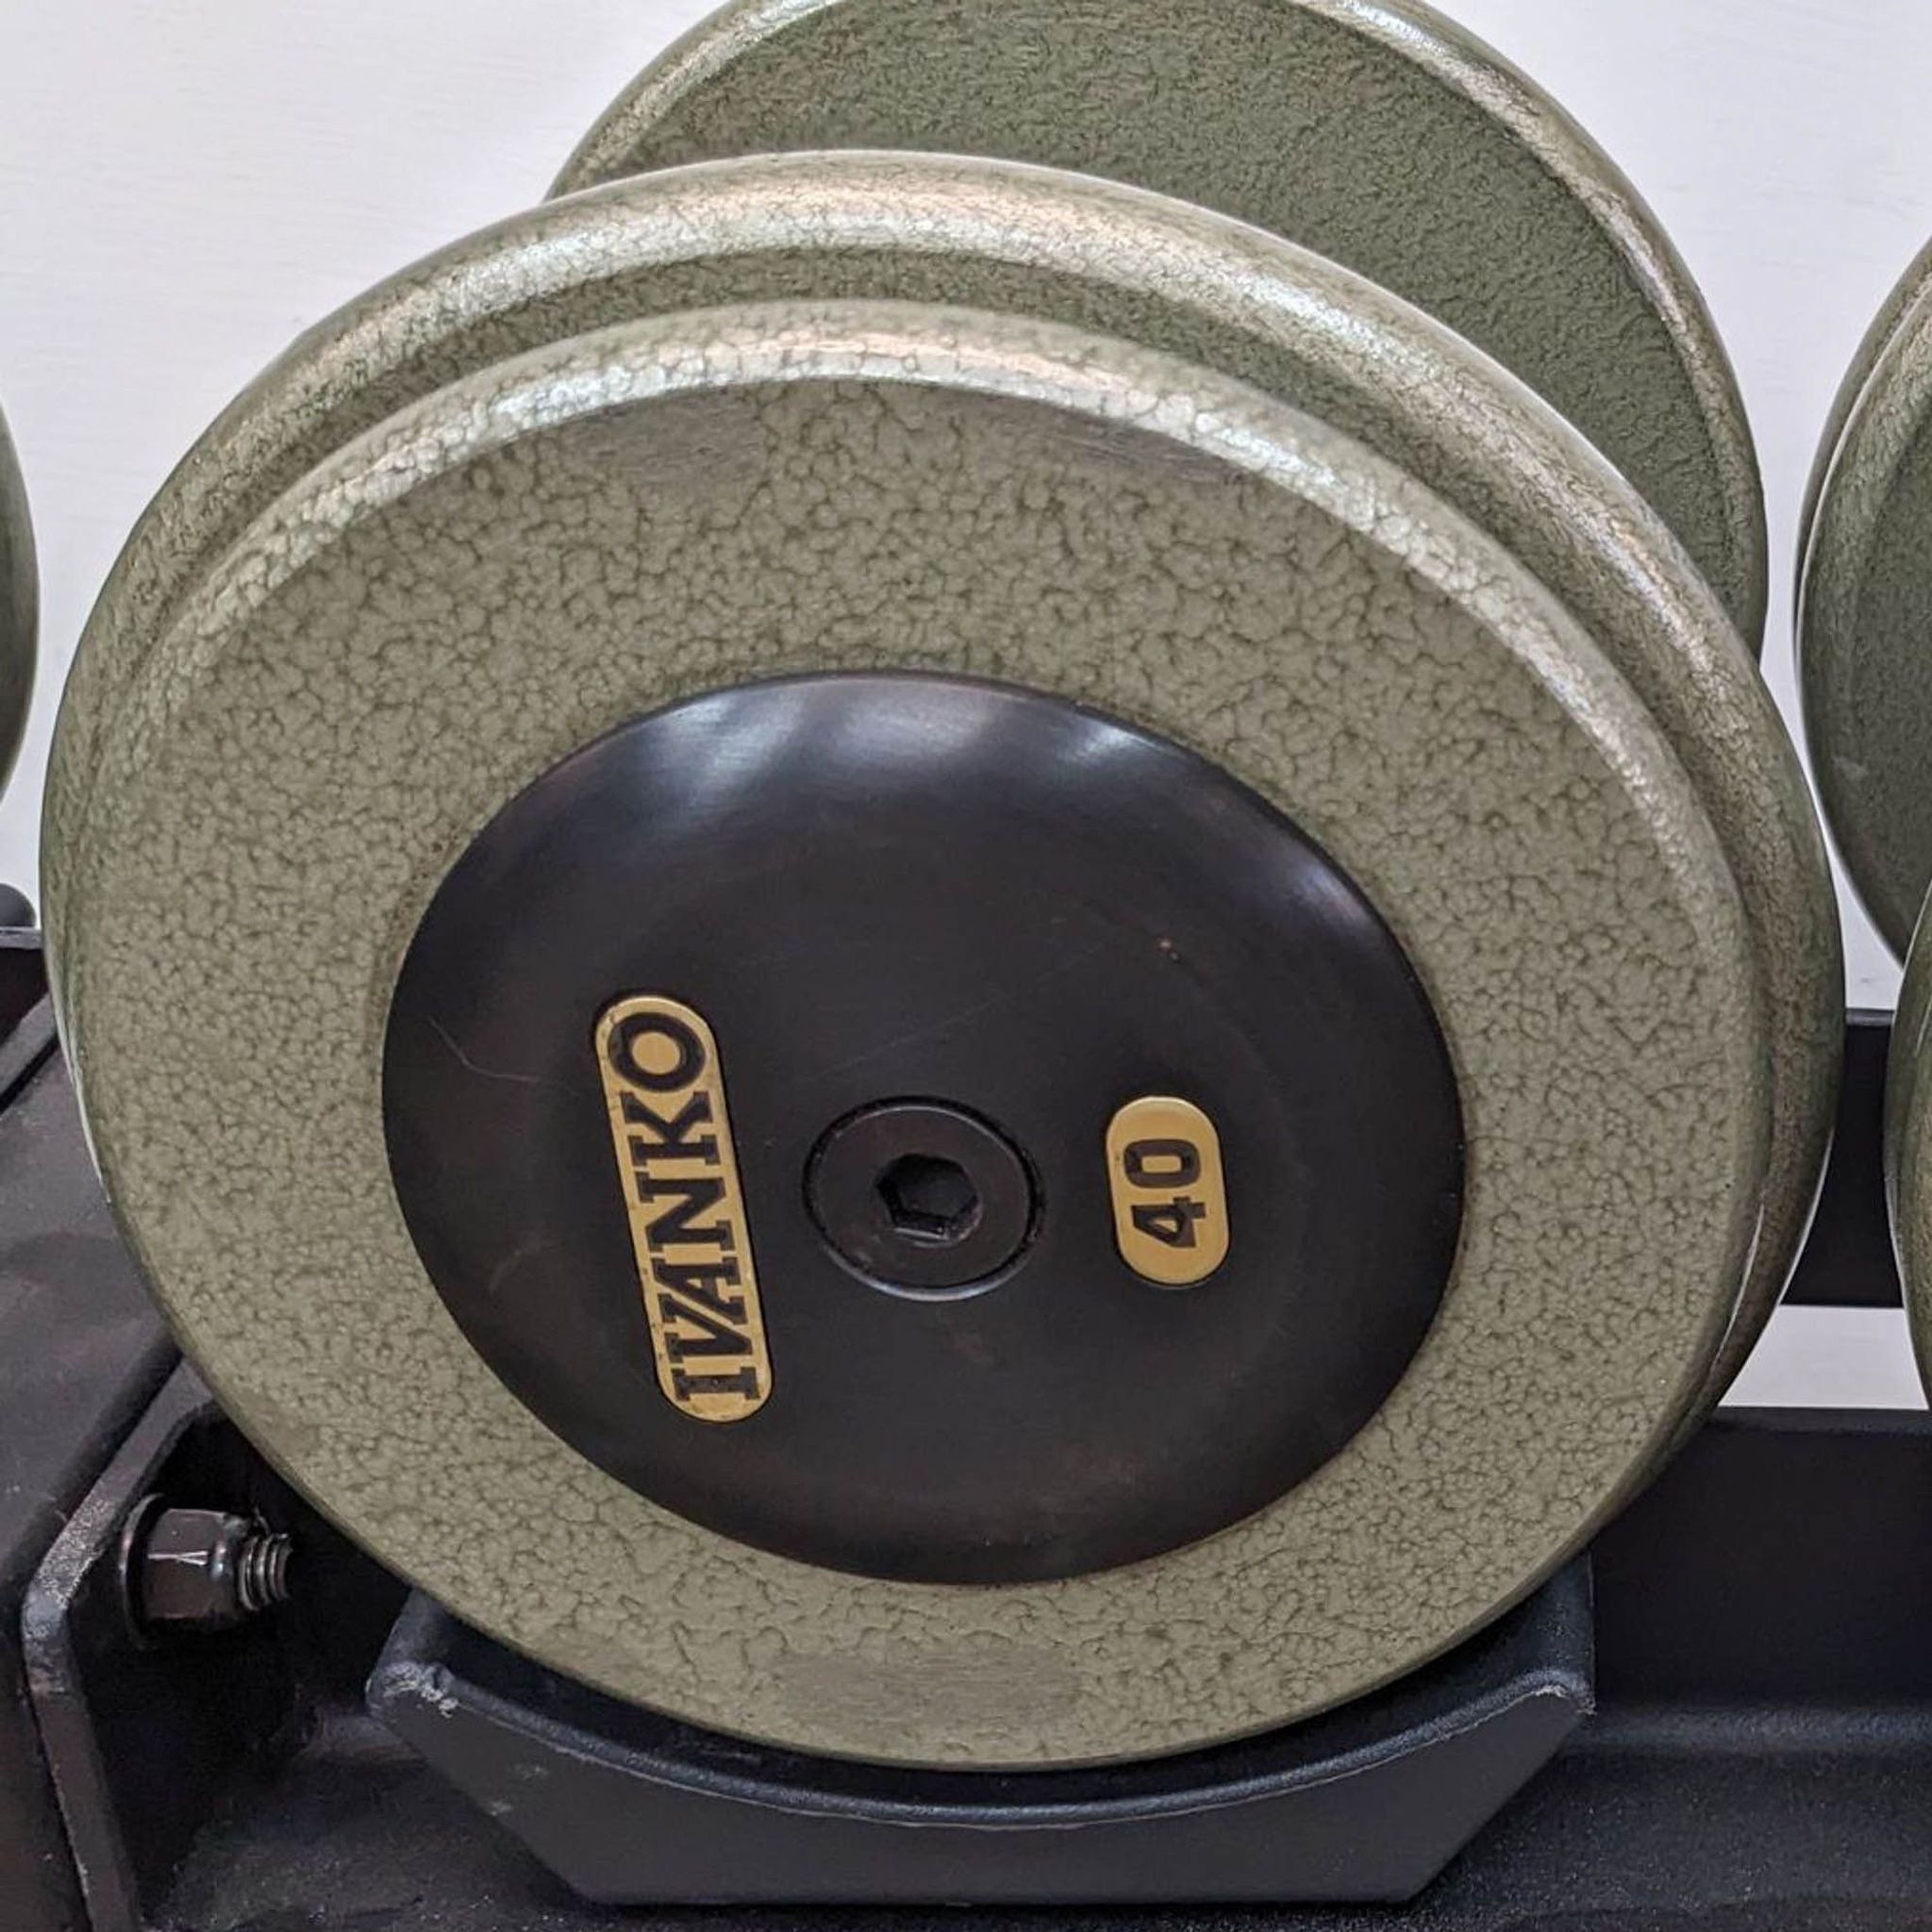 Close-up of a 40-pound Ivanko dumbbell on a rack, highlighting the textured finish and brand logo.